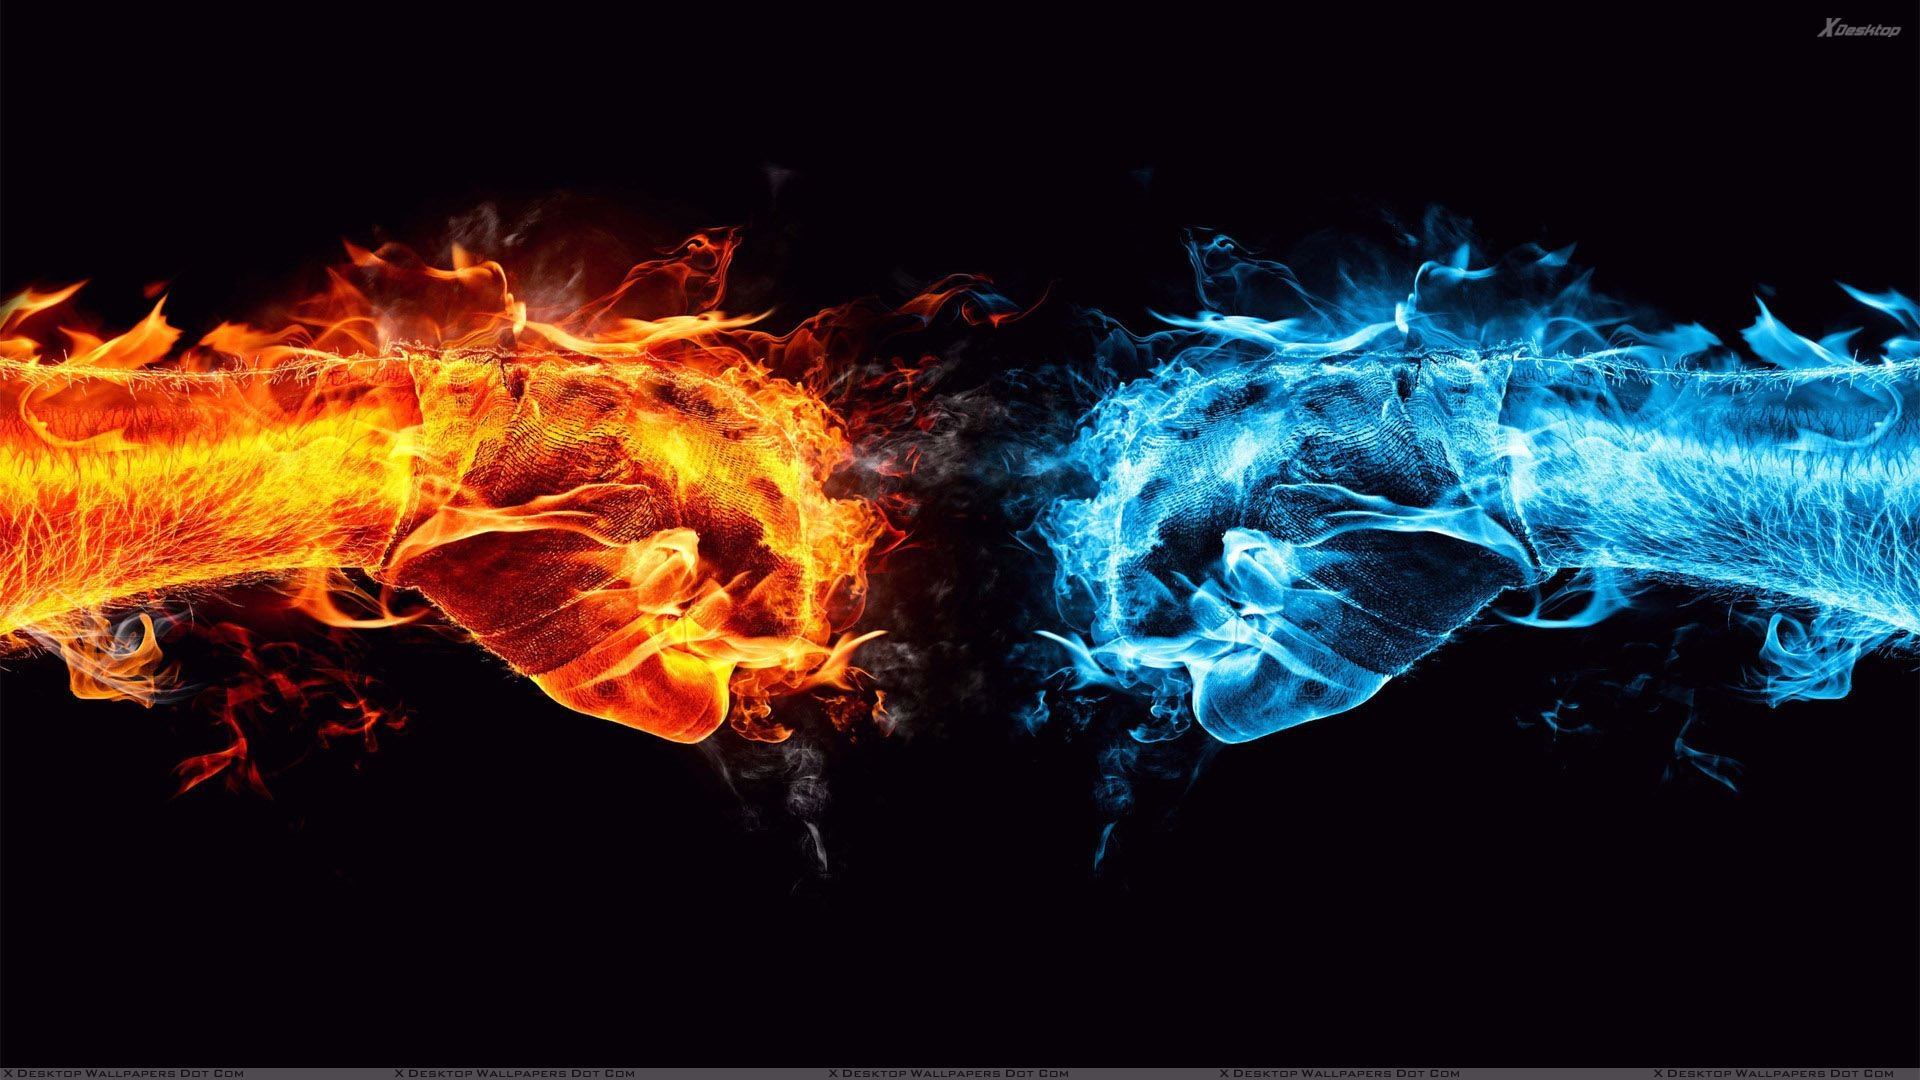 1920x1080 You are viewing wallpaper titled "Cool Vs Hot Fists On Black Background" ...